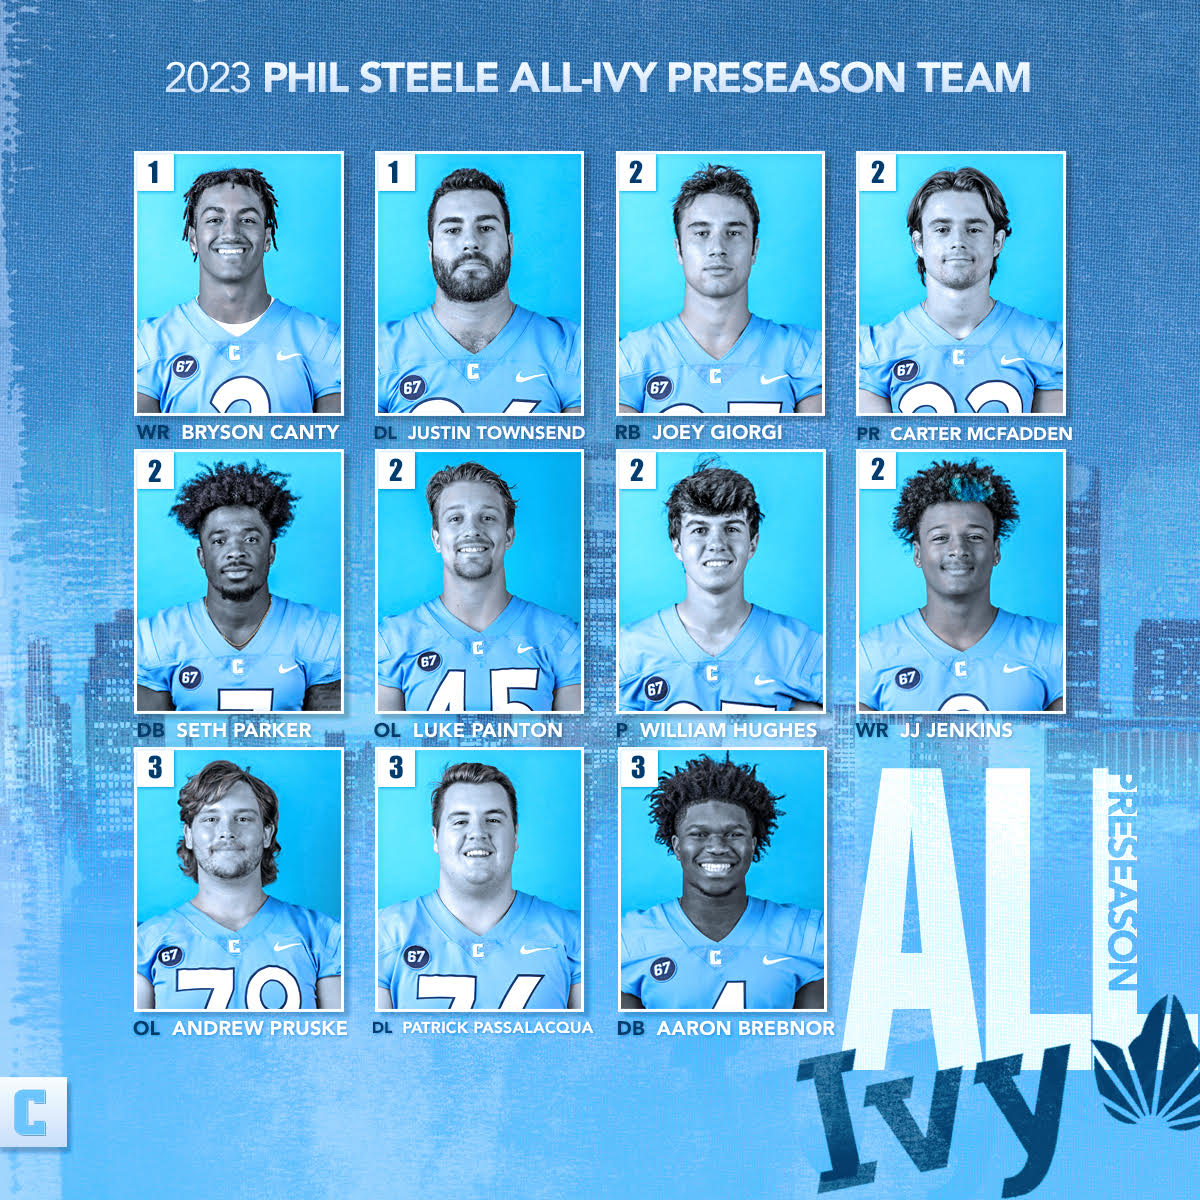 Got a whole squad representing the 🦁 on this year's @philsteele042 preseason All-Ivy League teams! 📰 bit.ly/3qbRynu #RoarLionRoar 🦁🏈